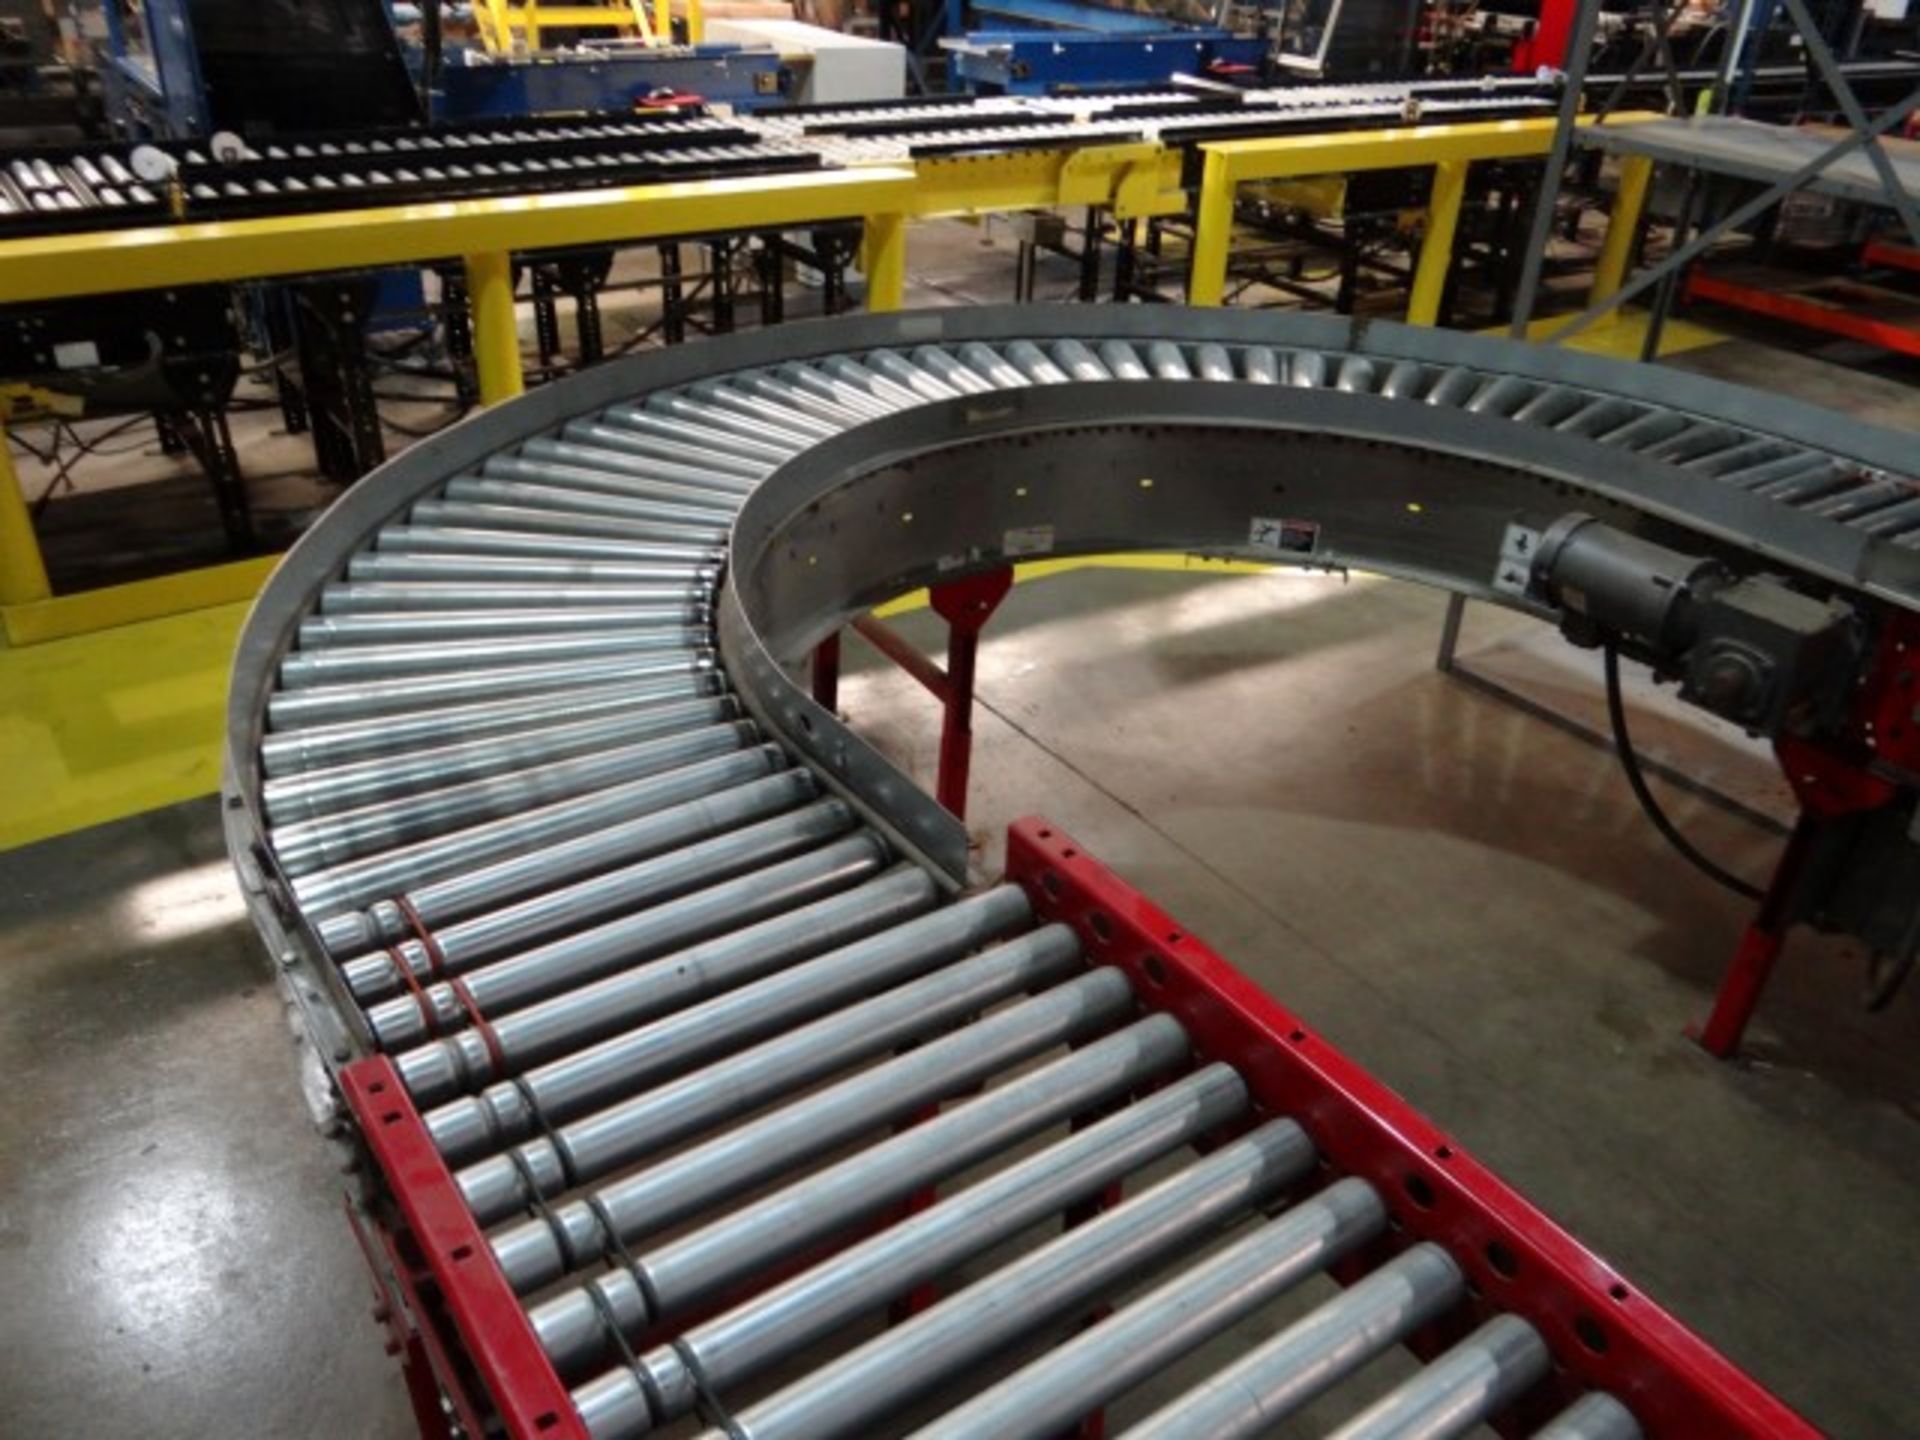 Tech King Cigarette Pick to Light System with 6 Pick Stations, Conveyors, Flow Racks, Box Tram and - Image 33 of 57